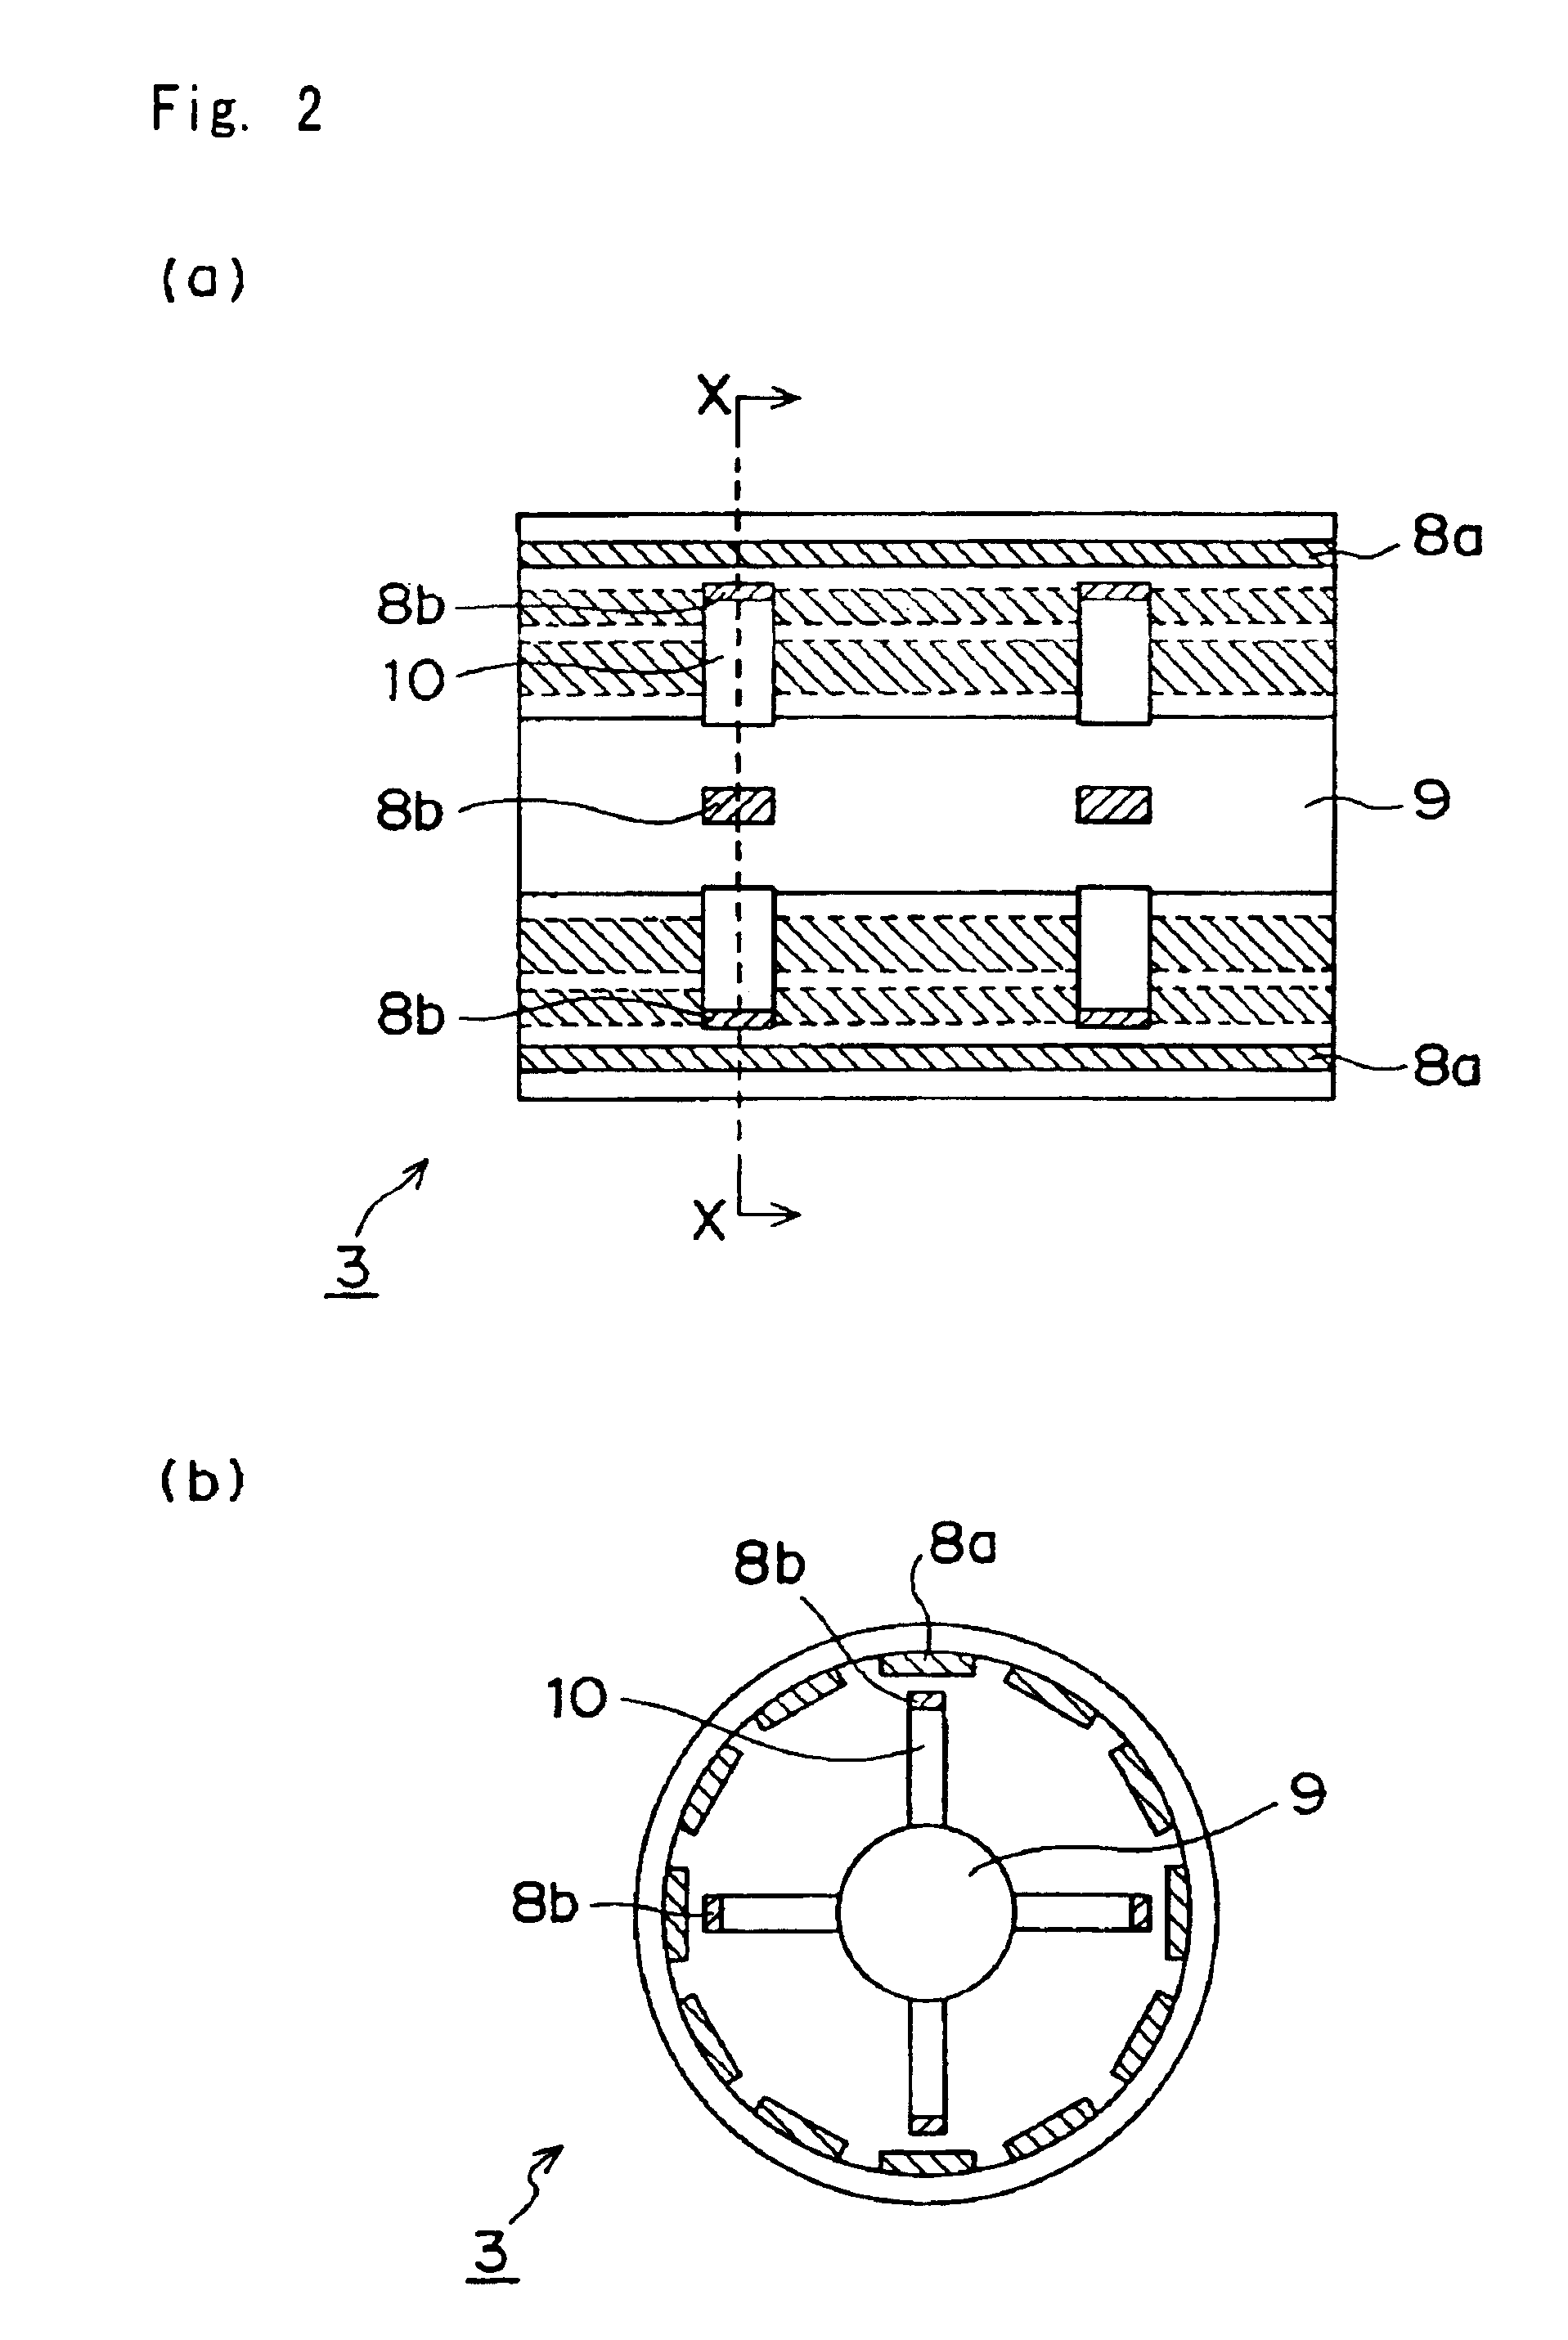 Method and apparatus for producing hydrogen fluoride